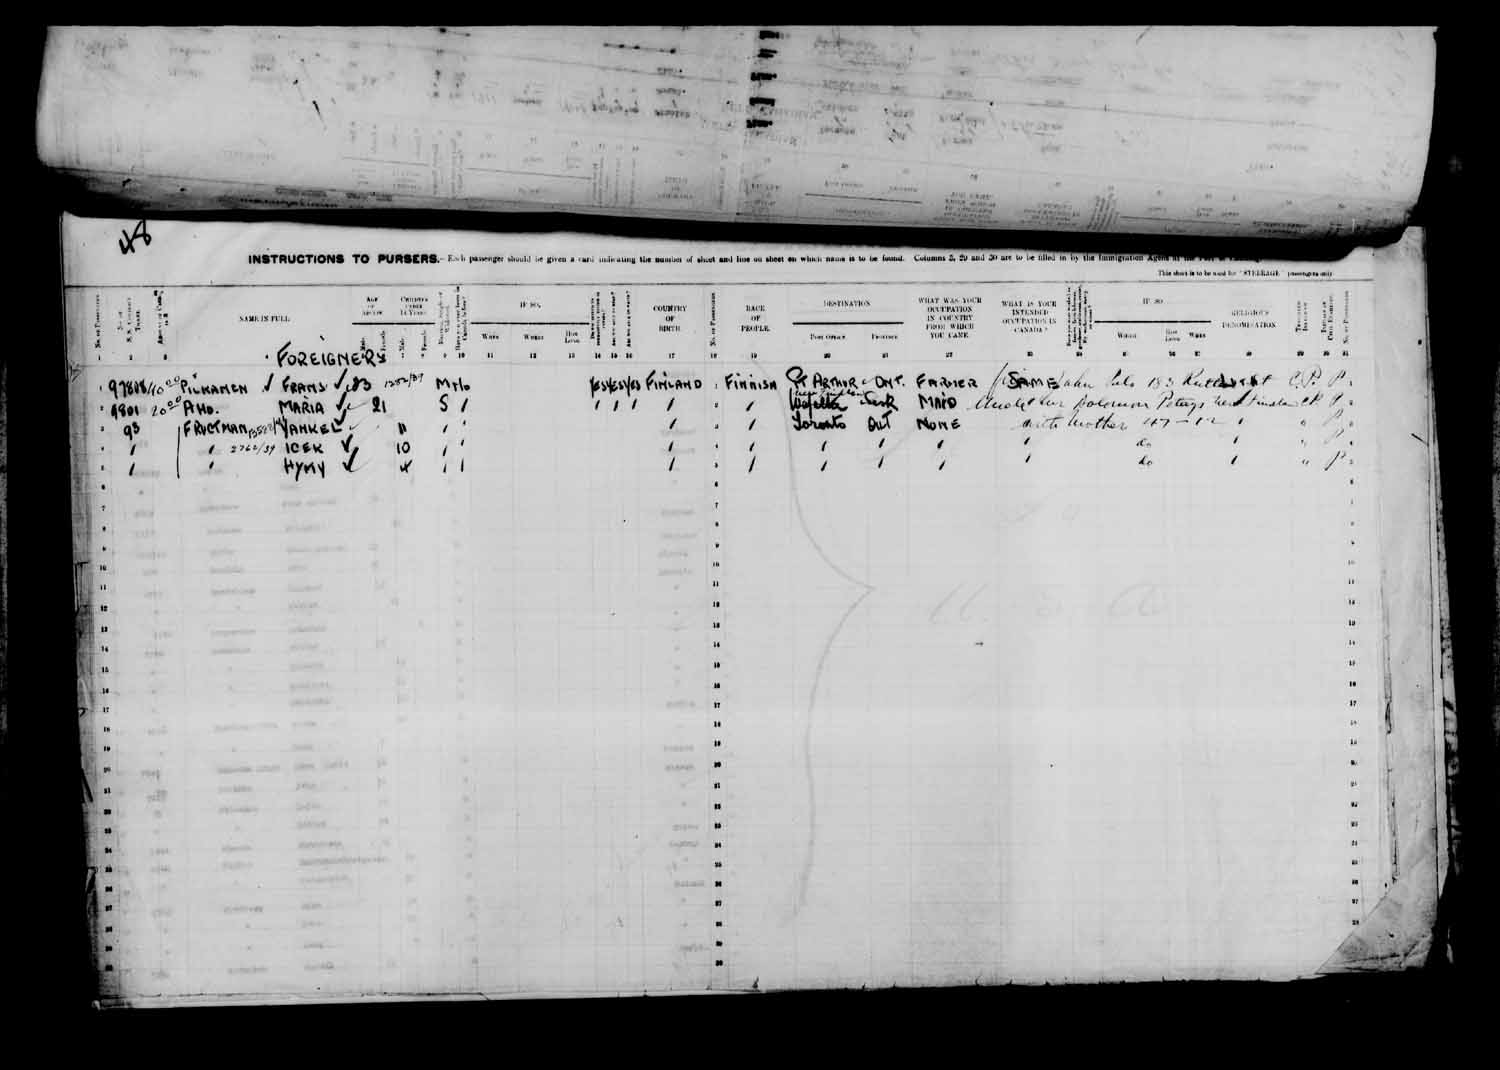 Digitized page of Passenger Lists for Image No.: e003610676